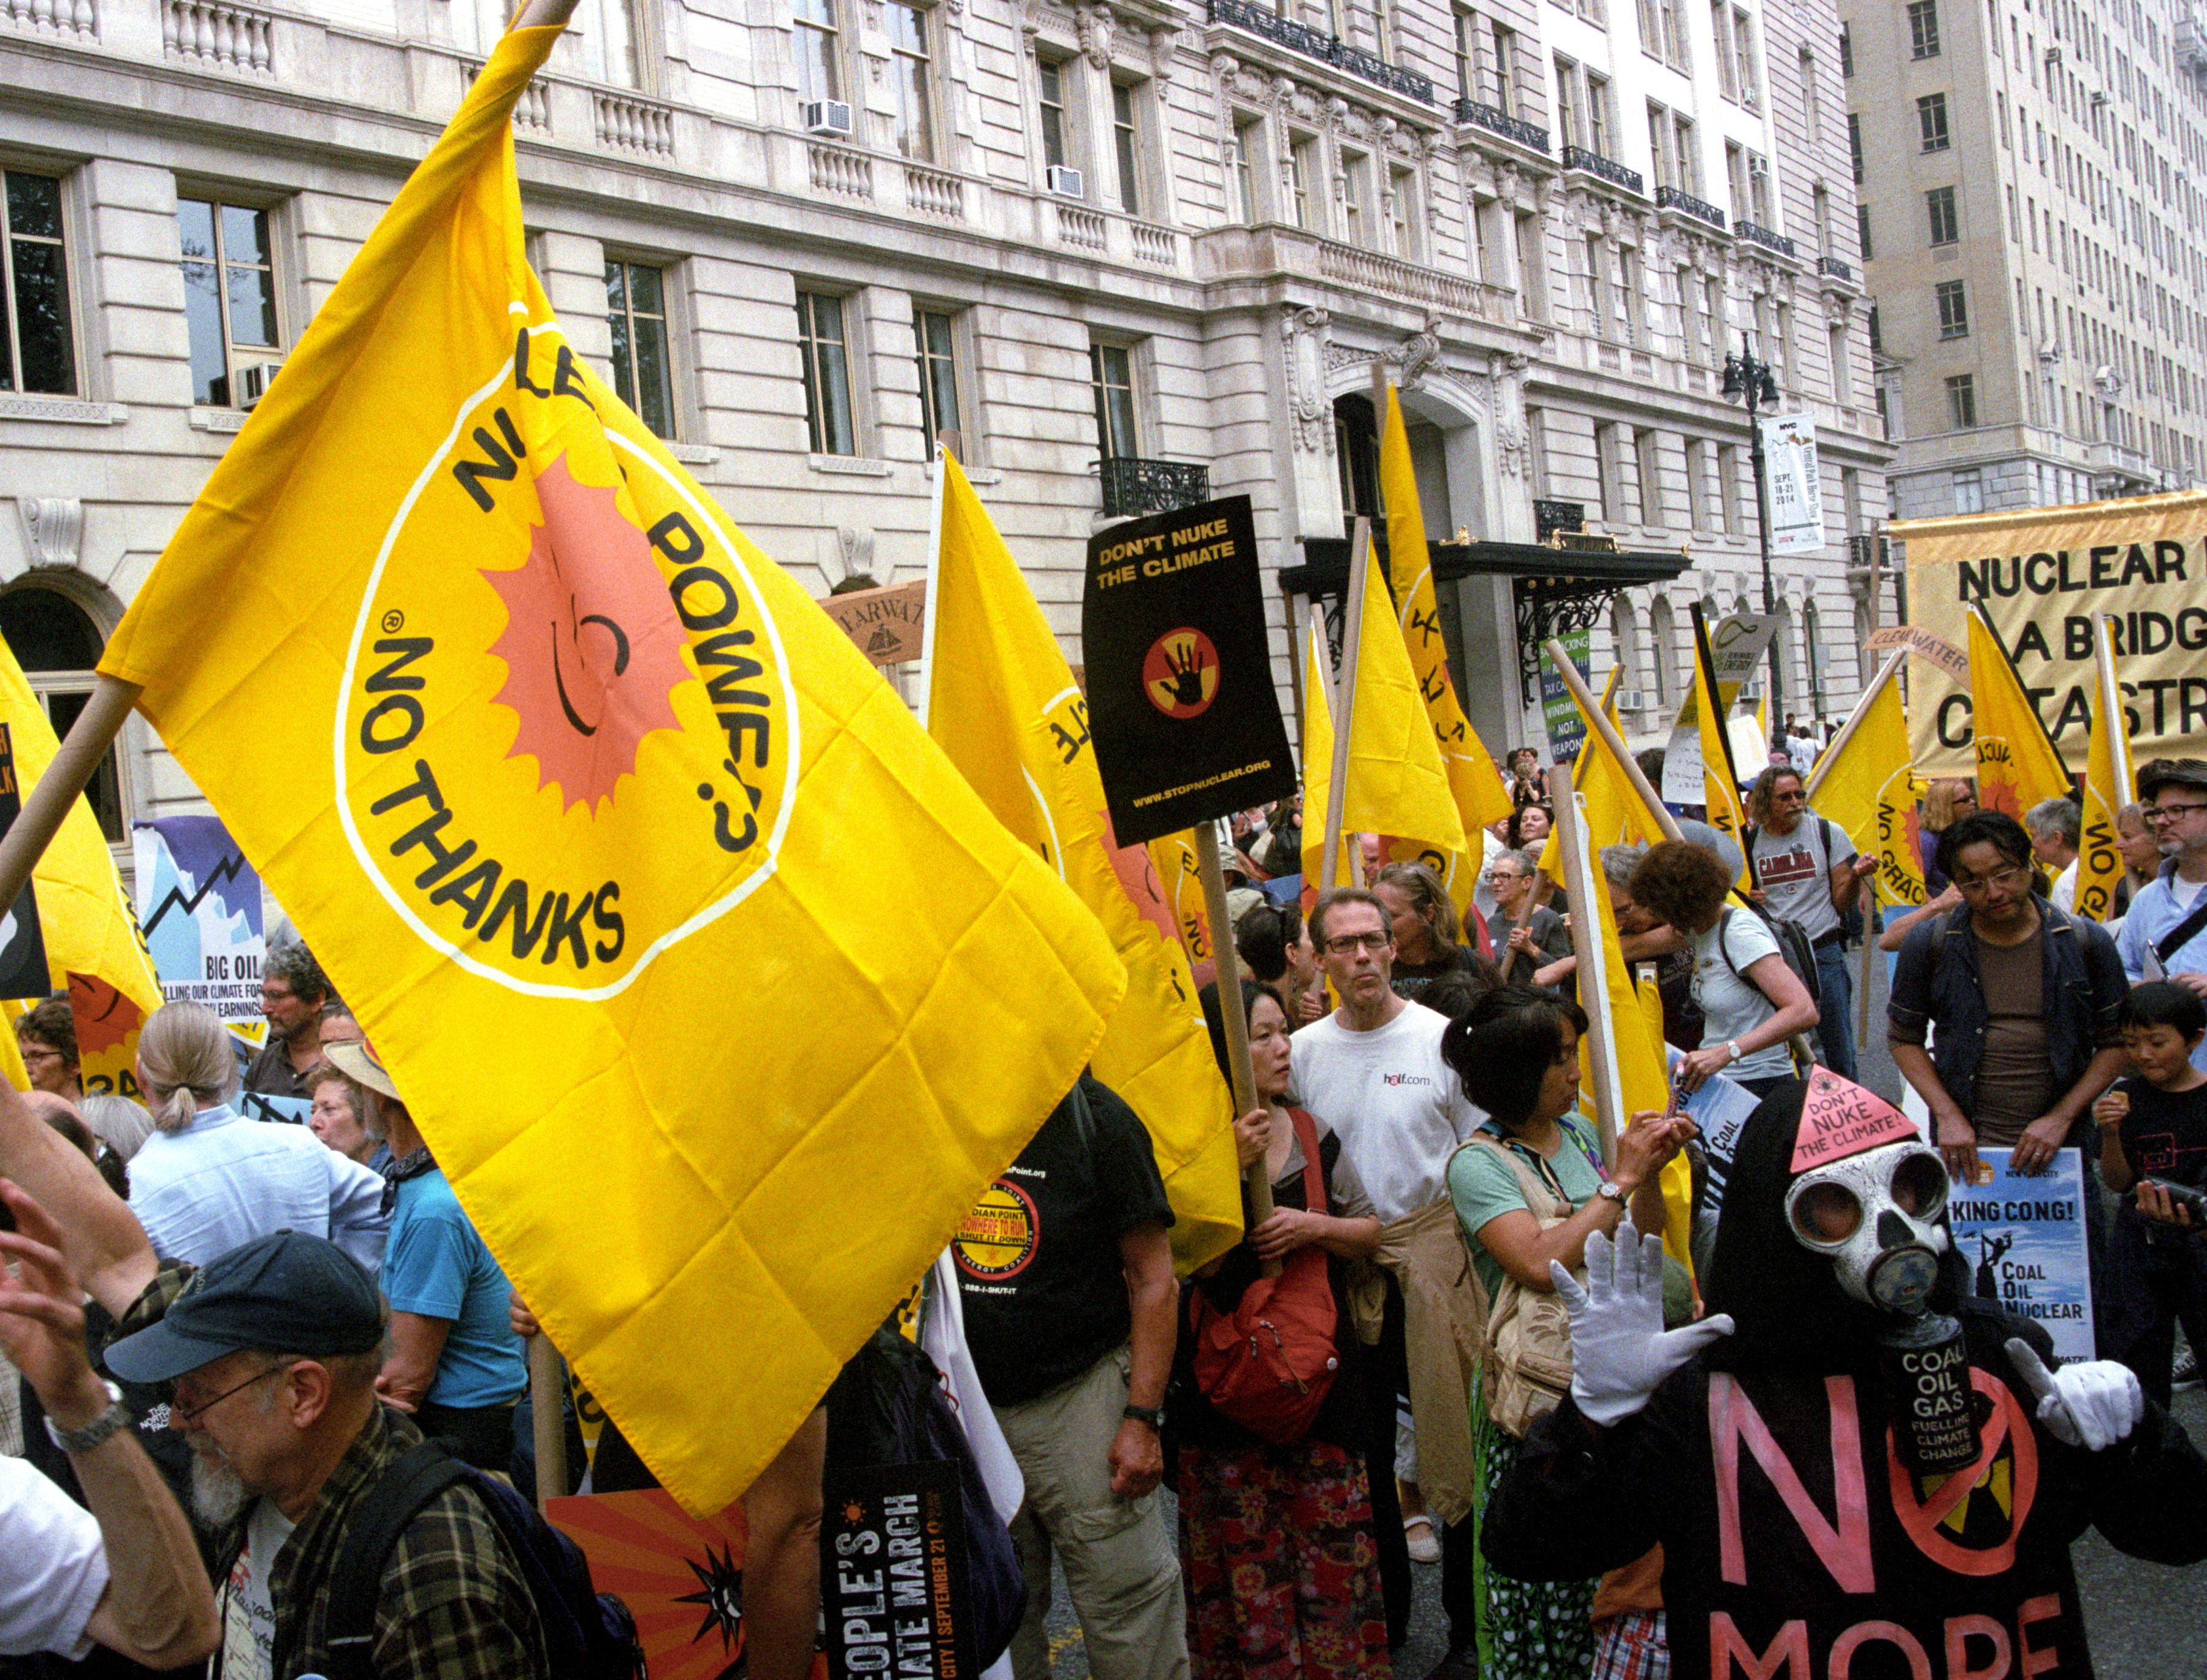 Thousands joined the nuclear-free, carbon-free contingent at last September's People's Climate March in New York City. The unexpectedly large turnout--followed by tens of thousands of comments and petitions to the EPA, helped open the agency's eyes to first understand our position and then realize it made a lot of sense.